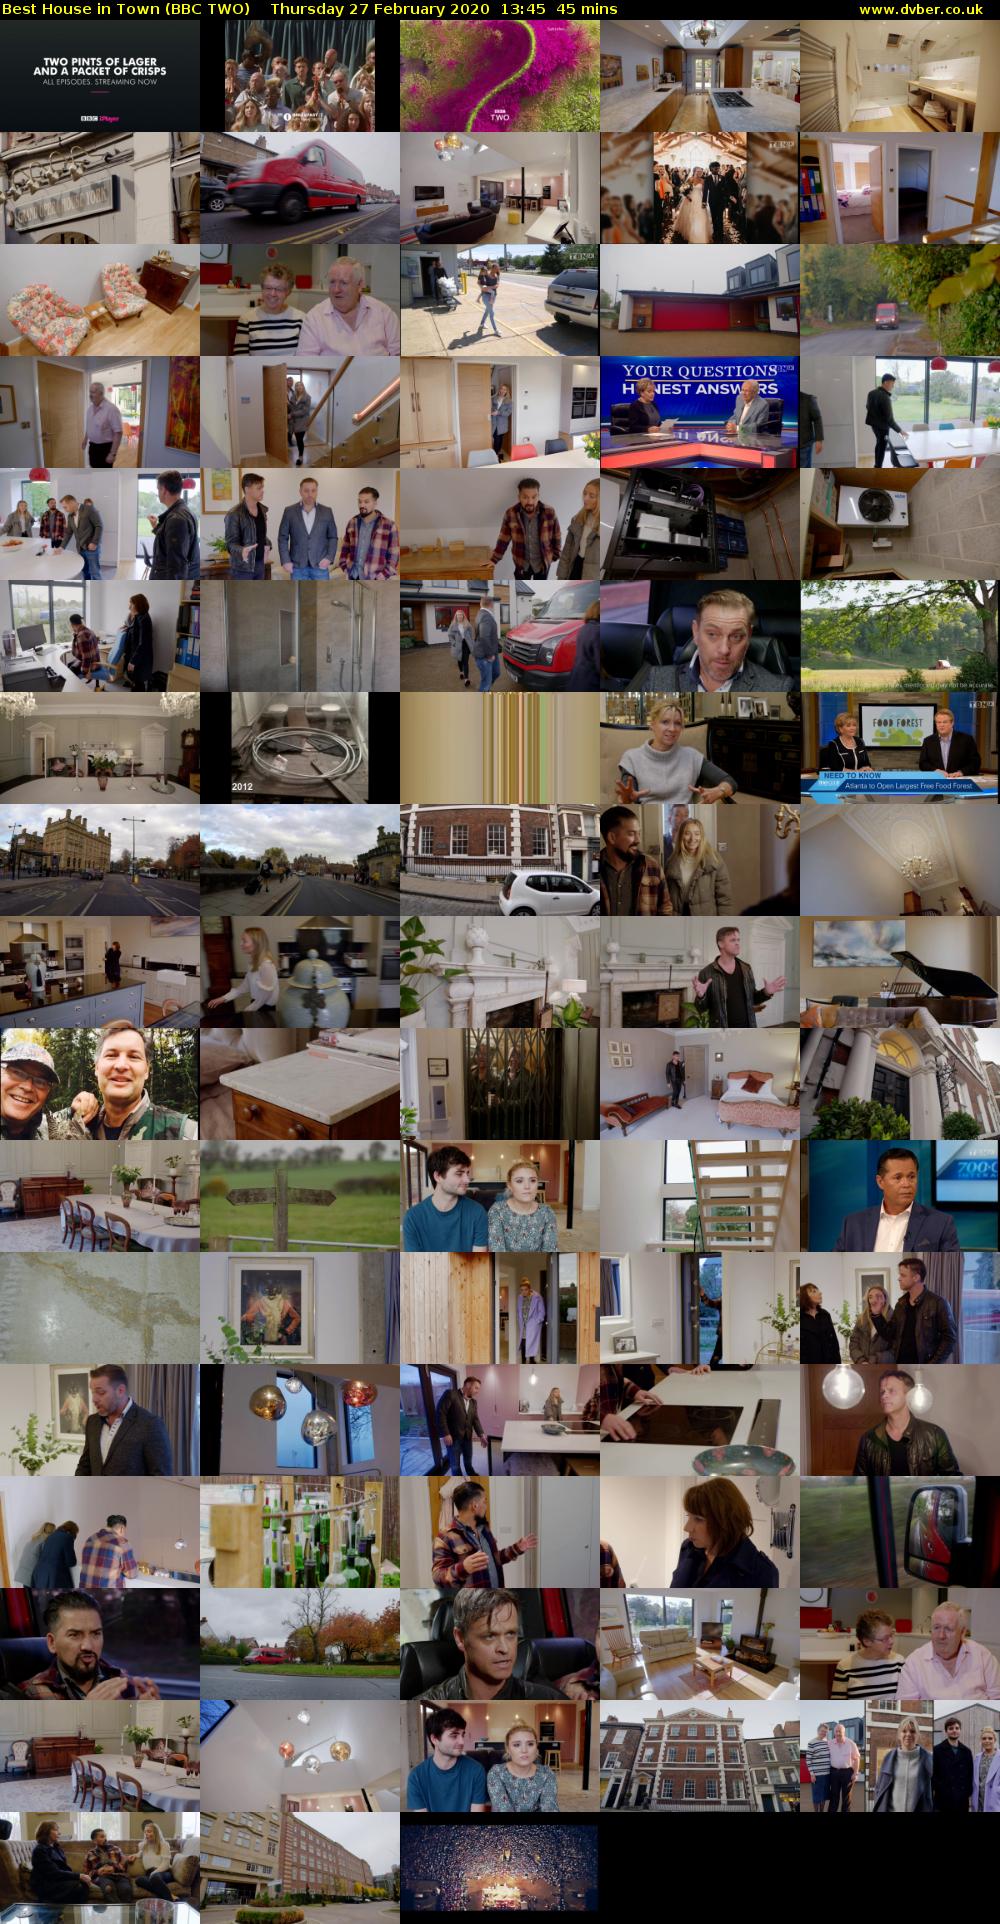 Best House in Town (BBC TWO) Thursday 27 February 2020 13:45 - 14:30